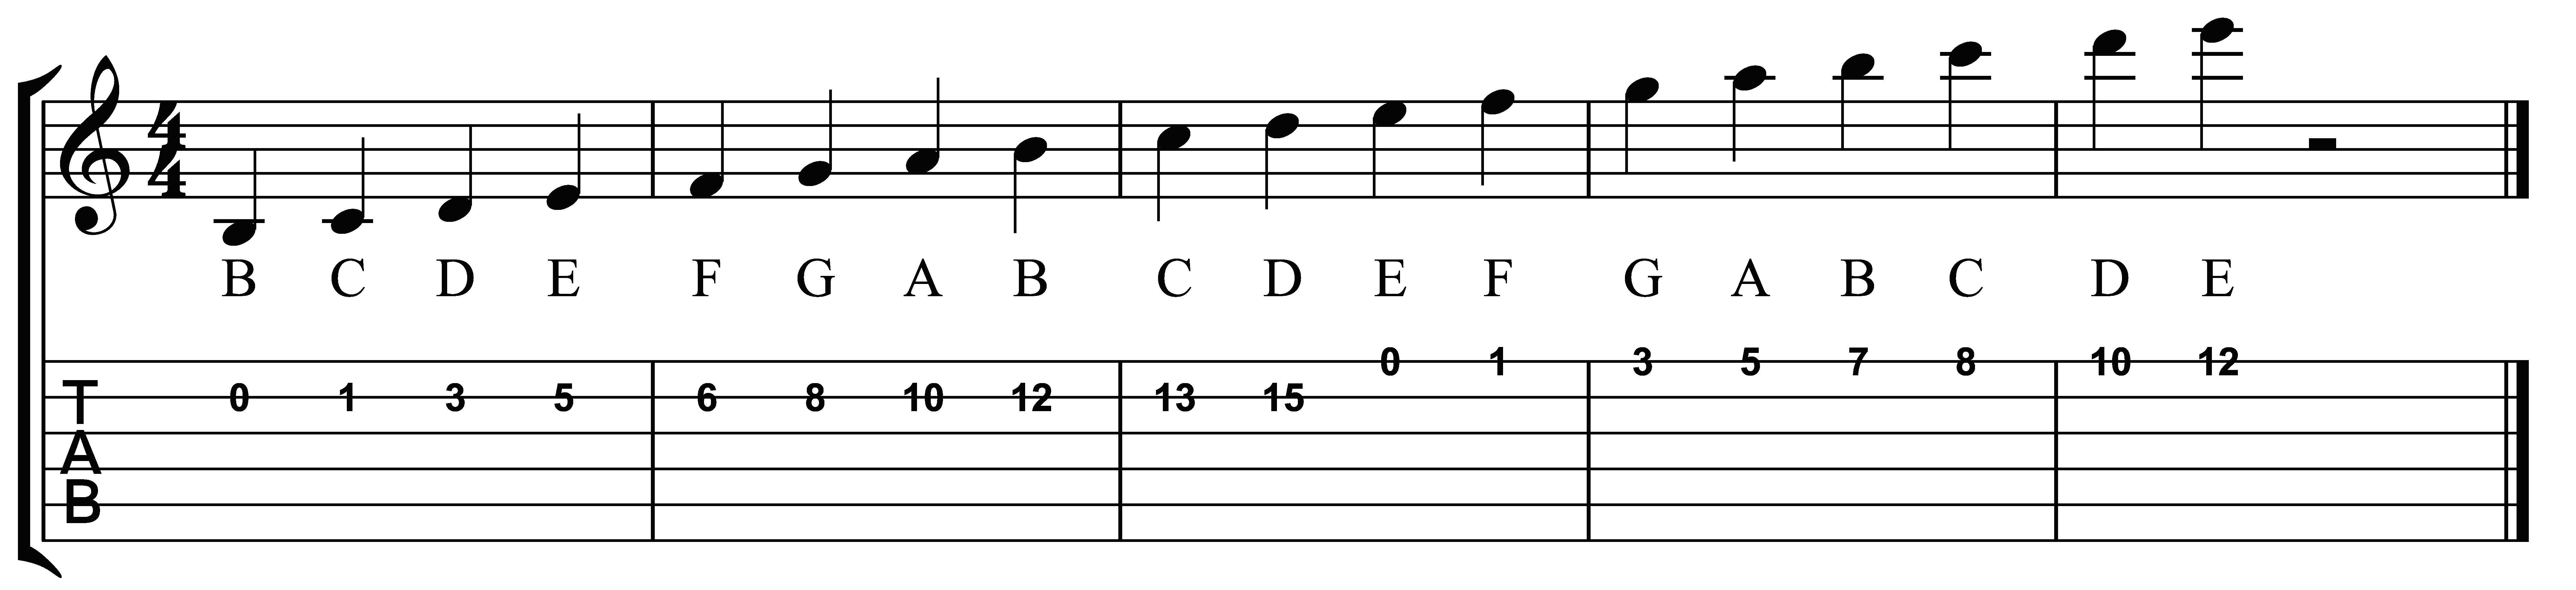 What Scale Is This Notes